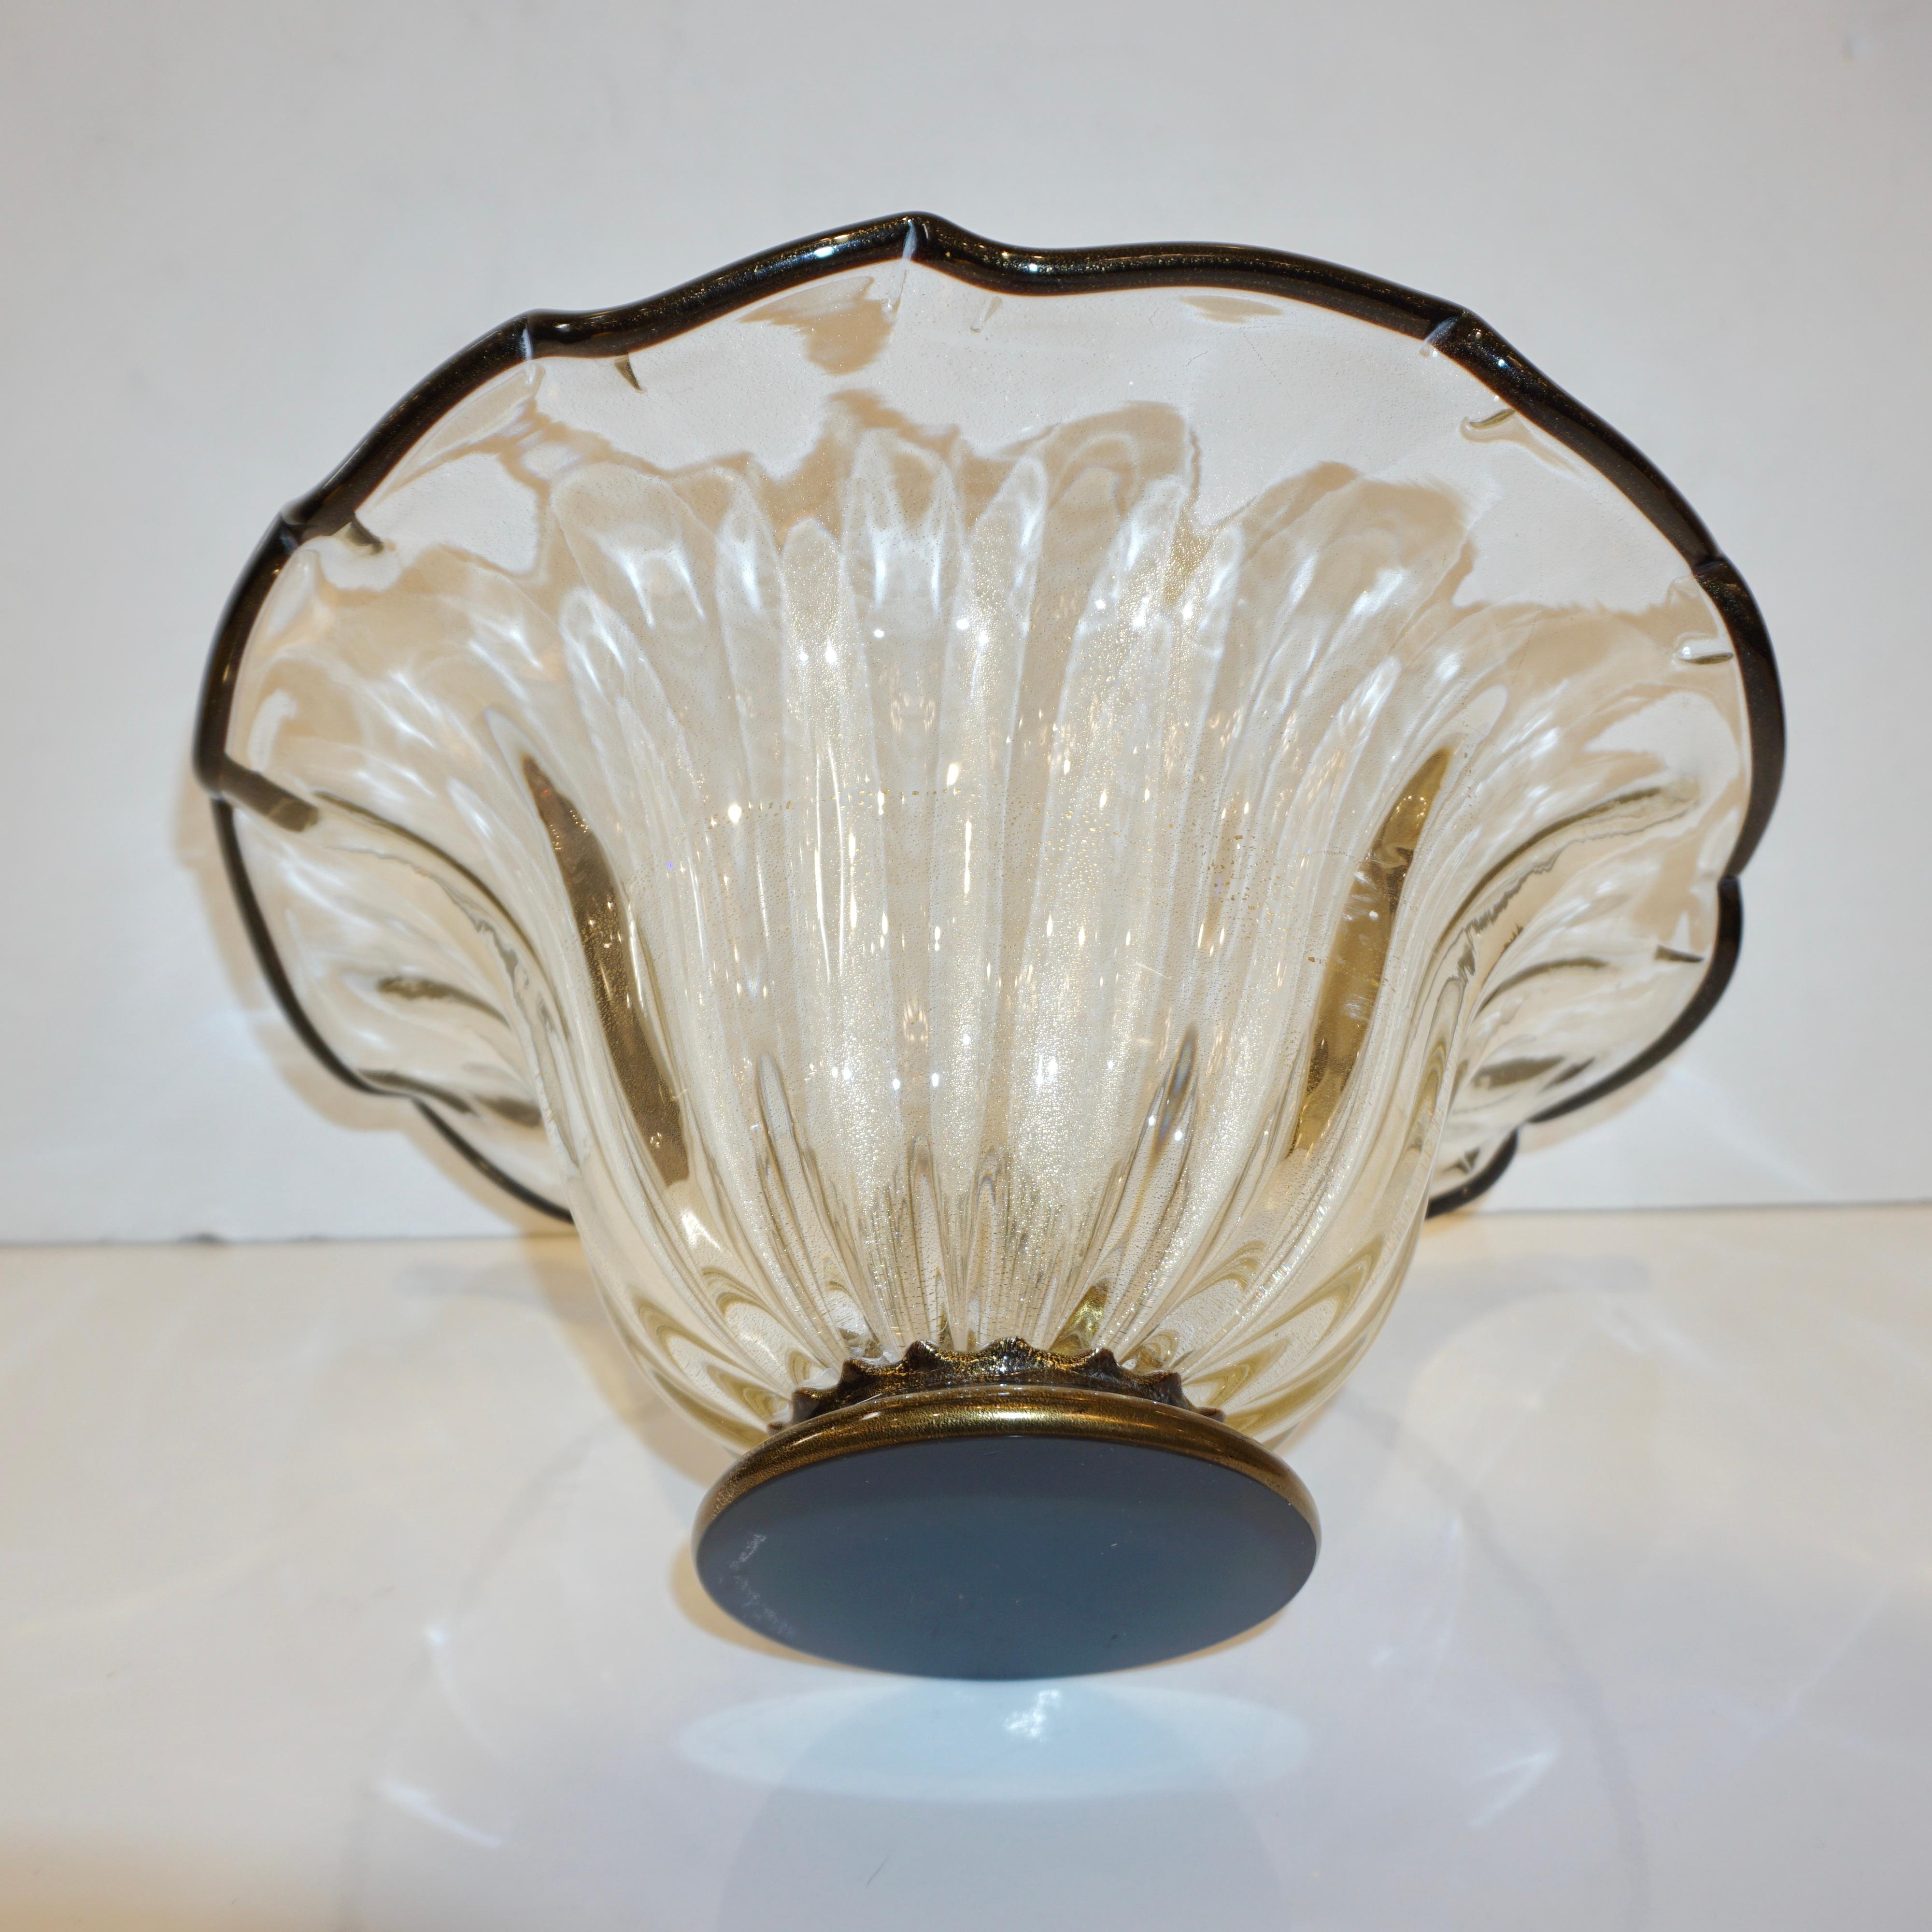 Italian Gold Dust Crystal Murano Glass Scalloped Centerpiece/Bowl with Black Rim For Sale 6